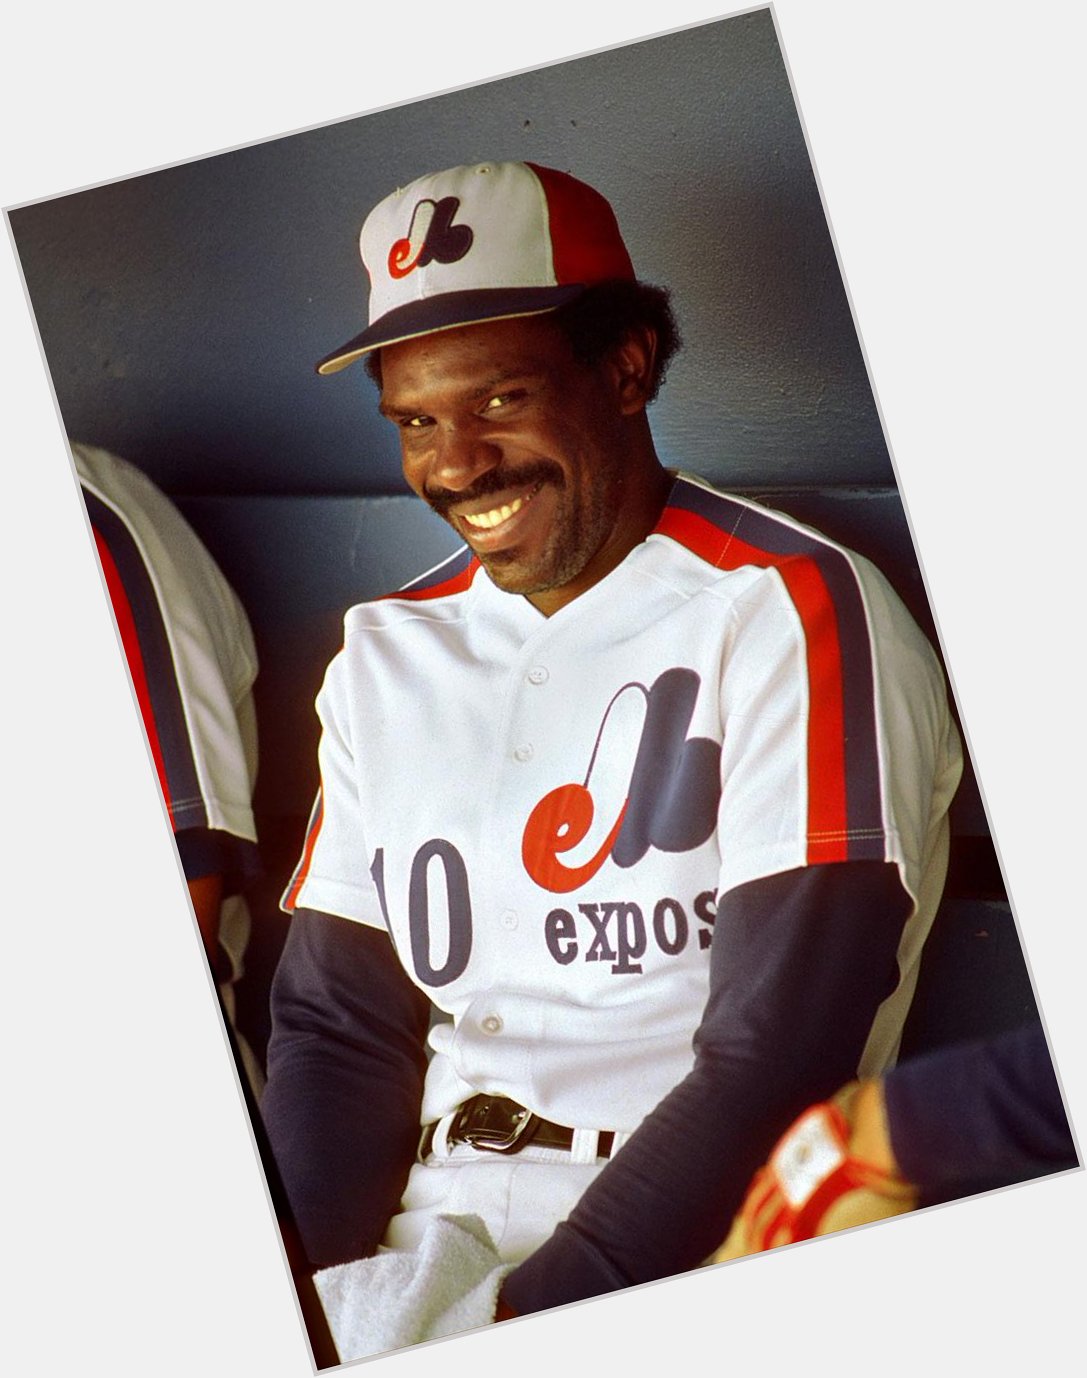 Happy birthday to former  all-star Andre Dawson, who turns 61 today! 